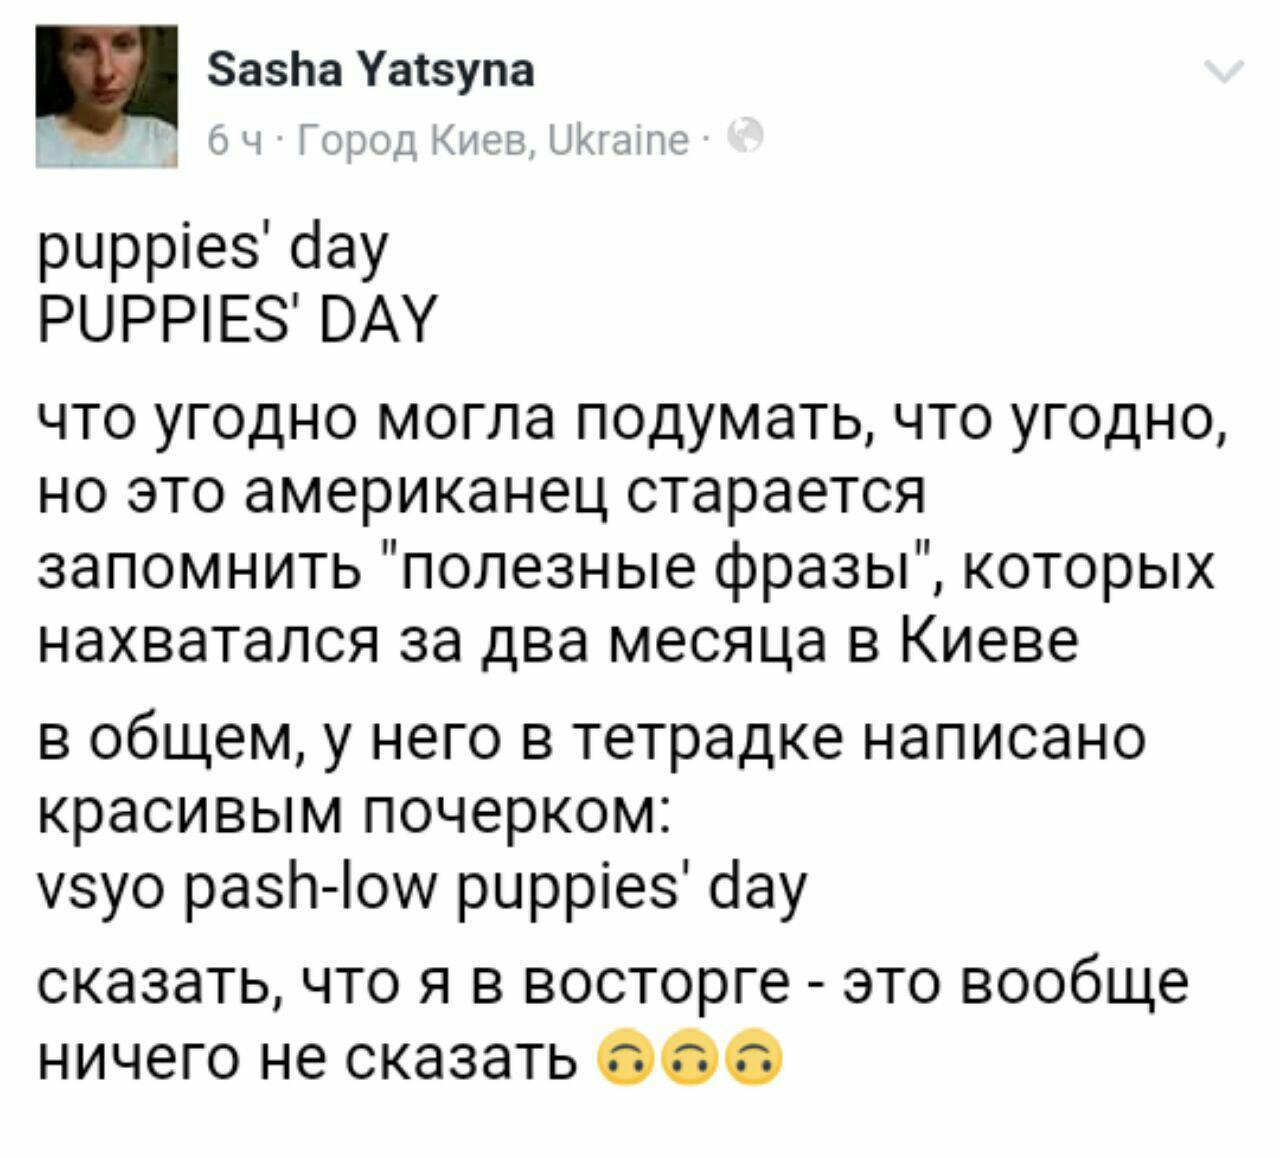 Everything went puppies' day - Twitter, The americans, Mat, Facebook